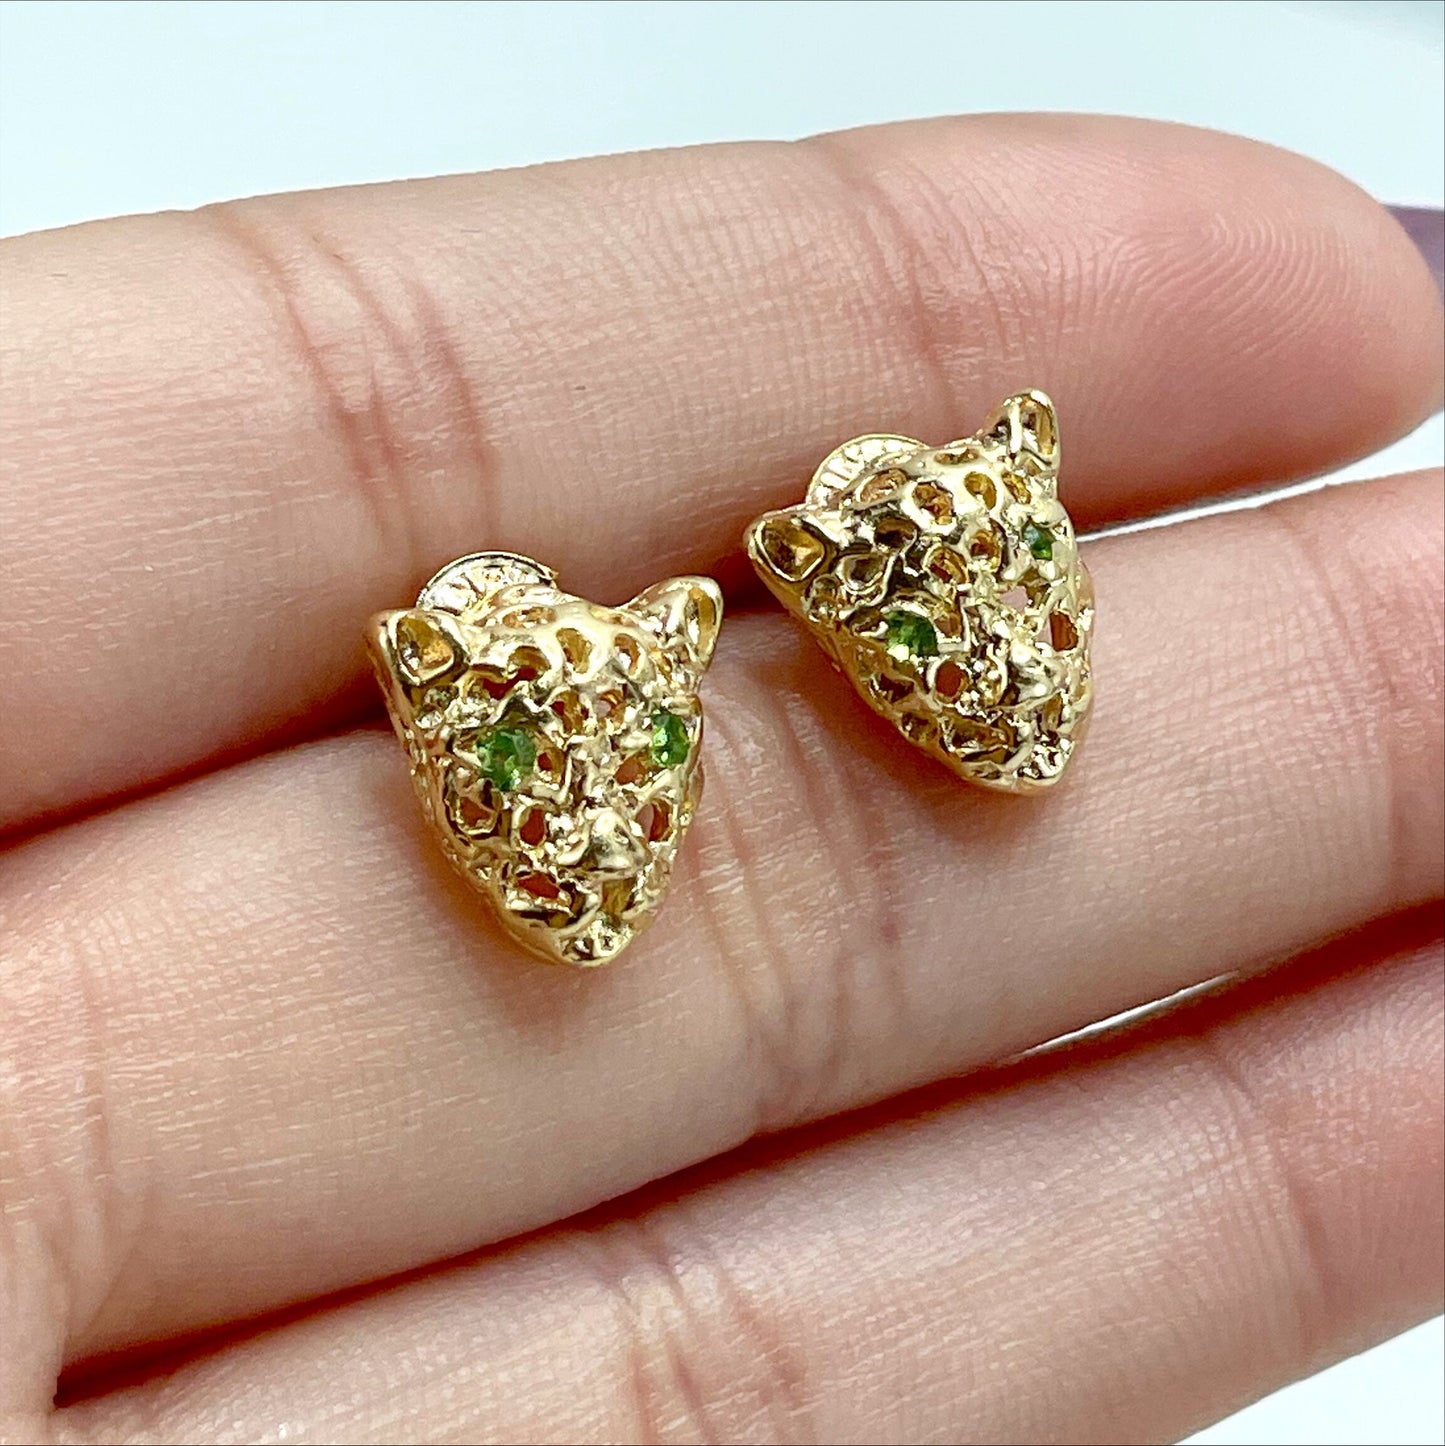 18k Gold Filled Micro Cubic Zirconia with Cutie Panther Head Shape Stud Earrings Wholesale Jewelry Making Supplies